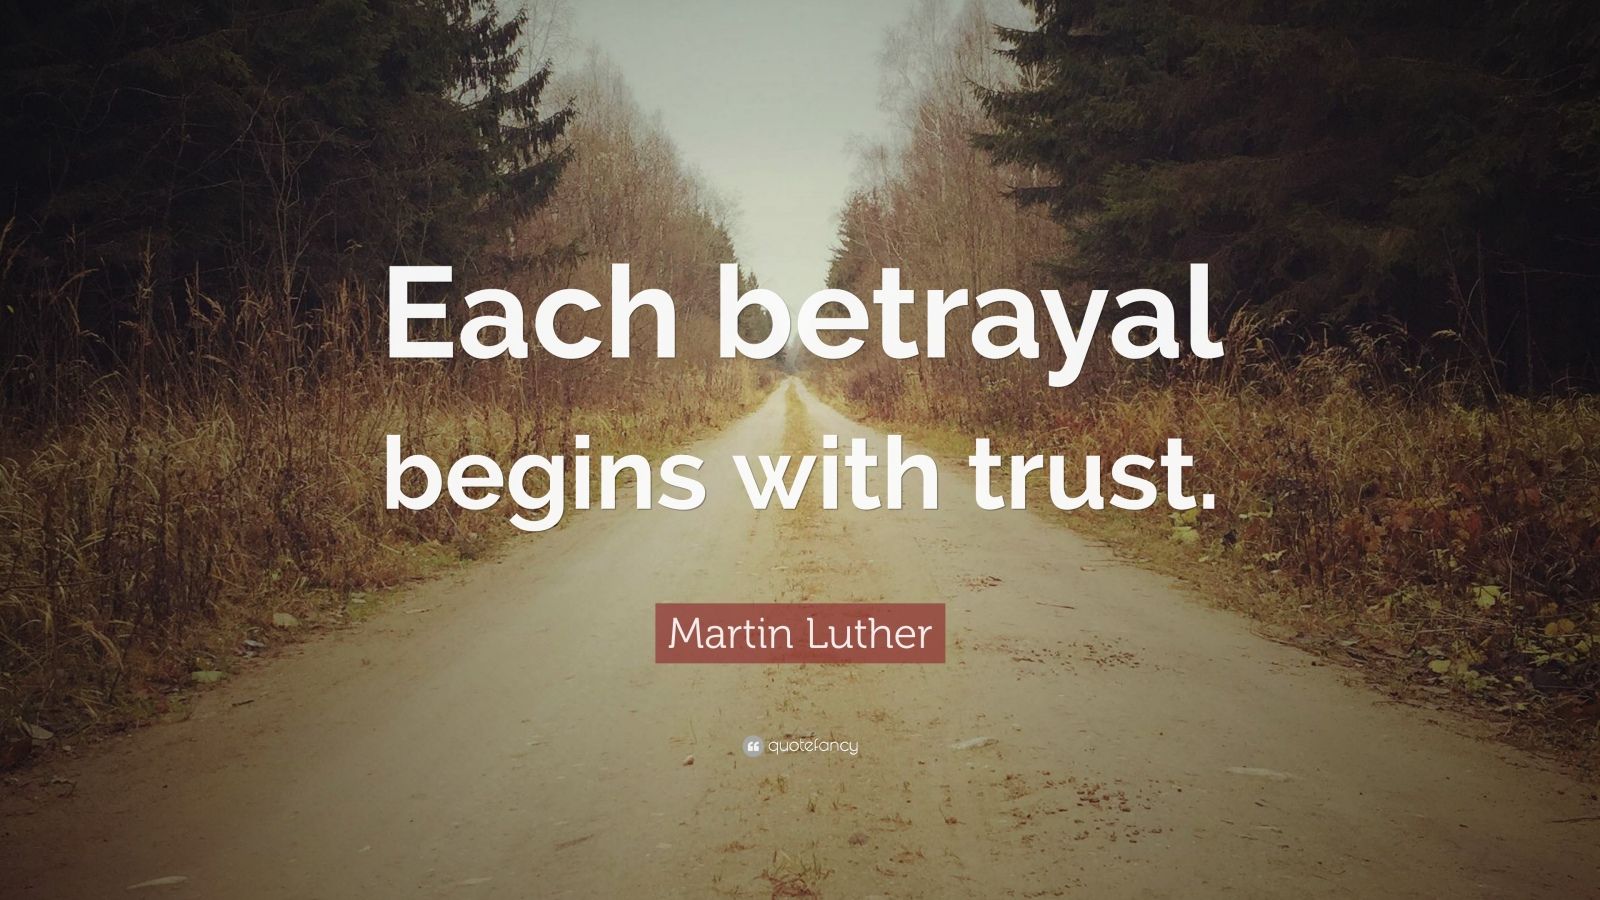 Top 40 Betrayal Quotes (2021 Update) - Quotefancy